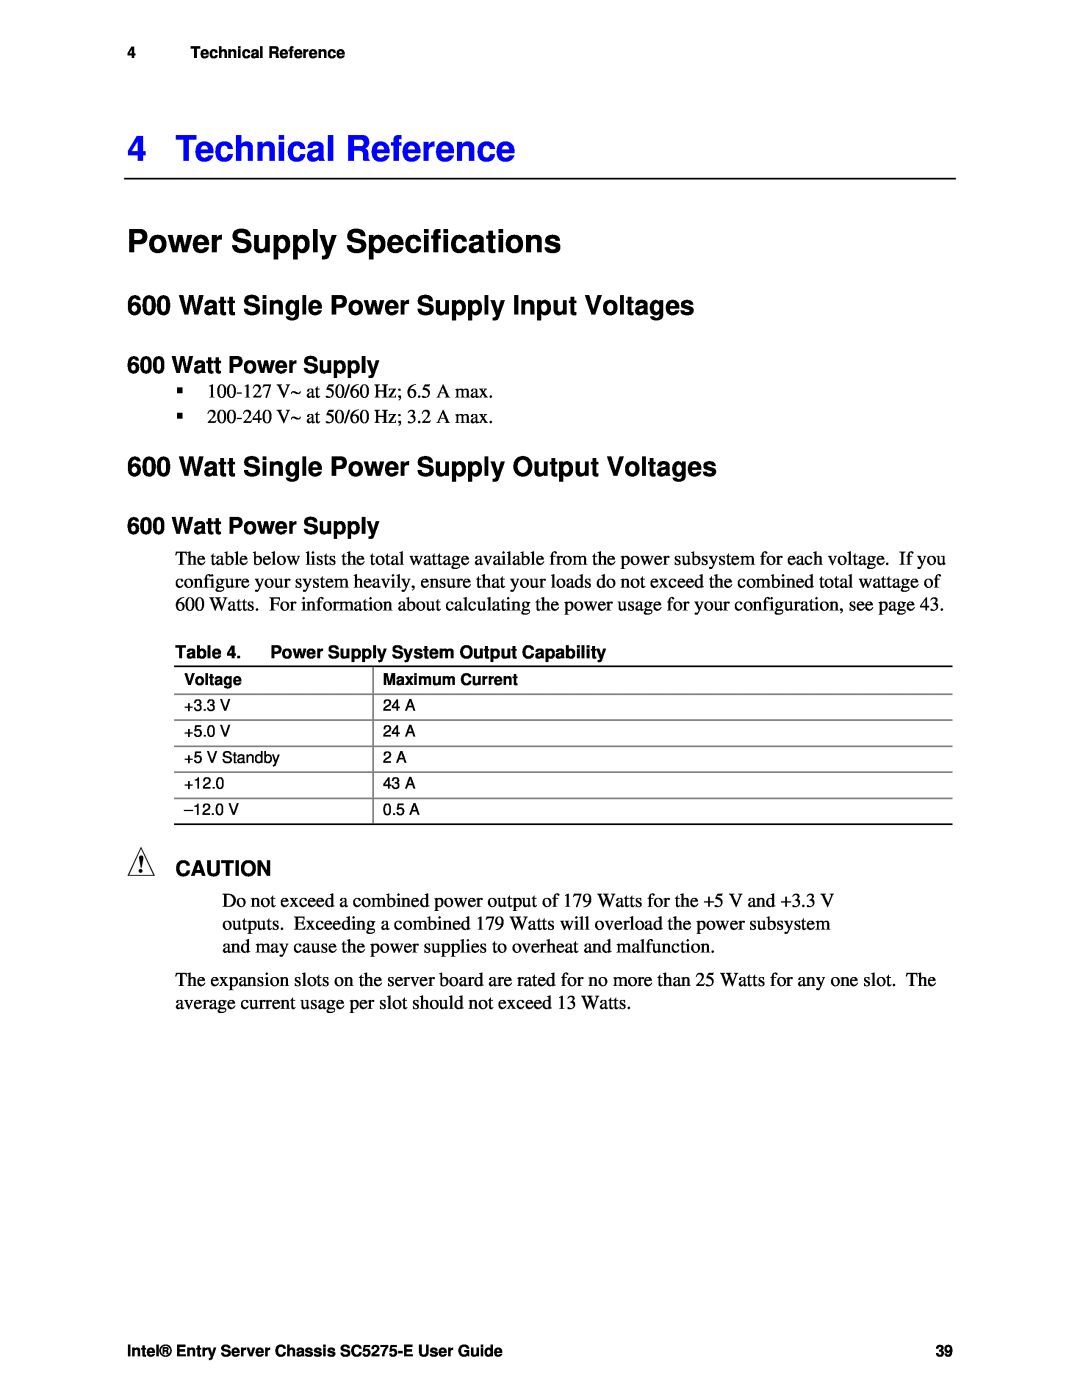 Intel C50277-001, SC5275-E manual Technical Reference, Power Supply Specifications, Watt Single Power Supply Input Voltages 